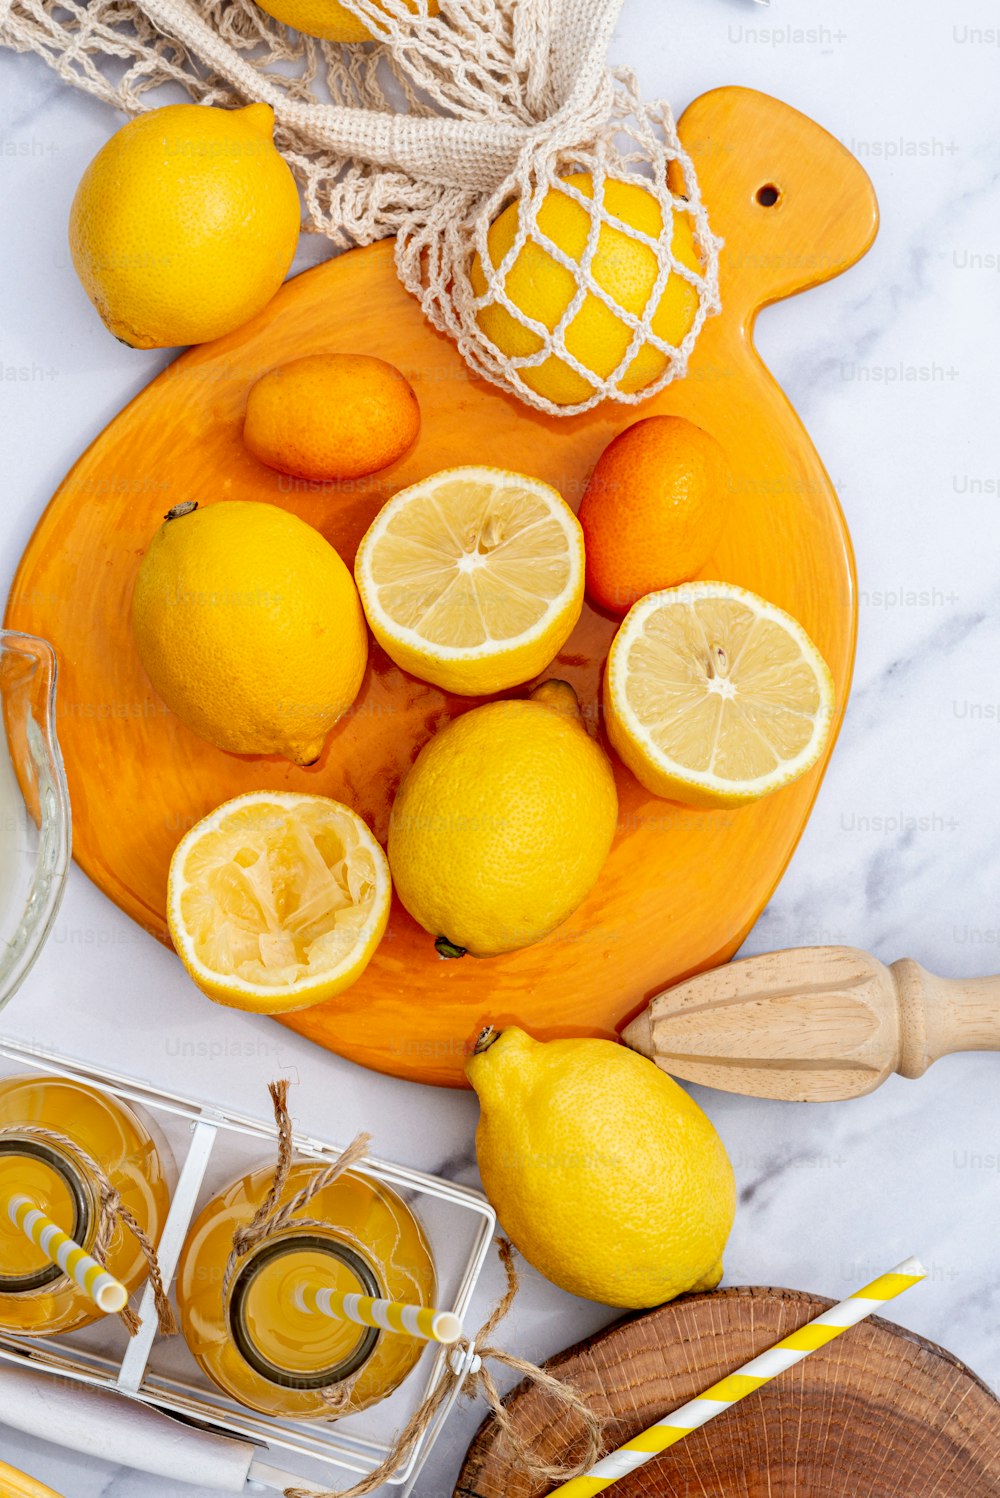 a plate of lemons and oranges on a table